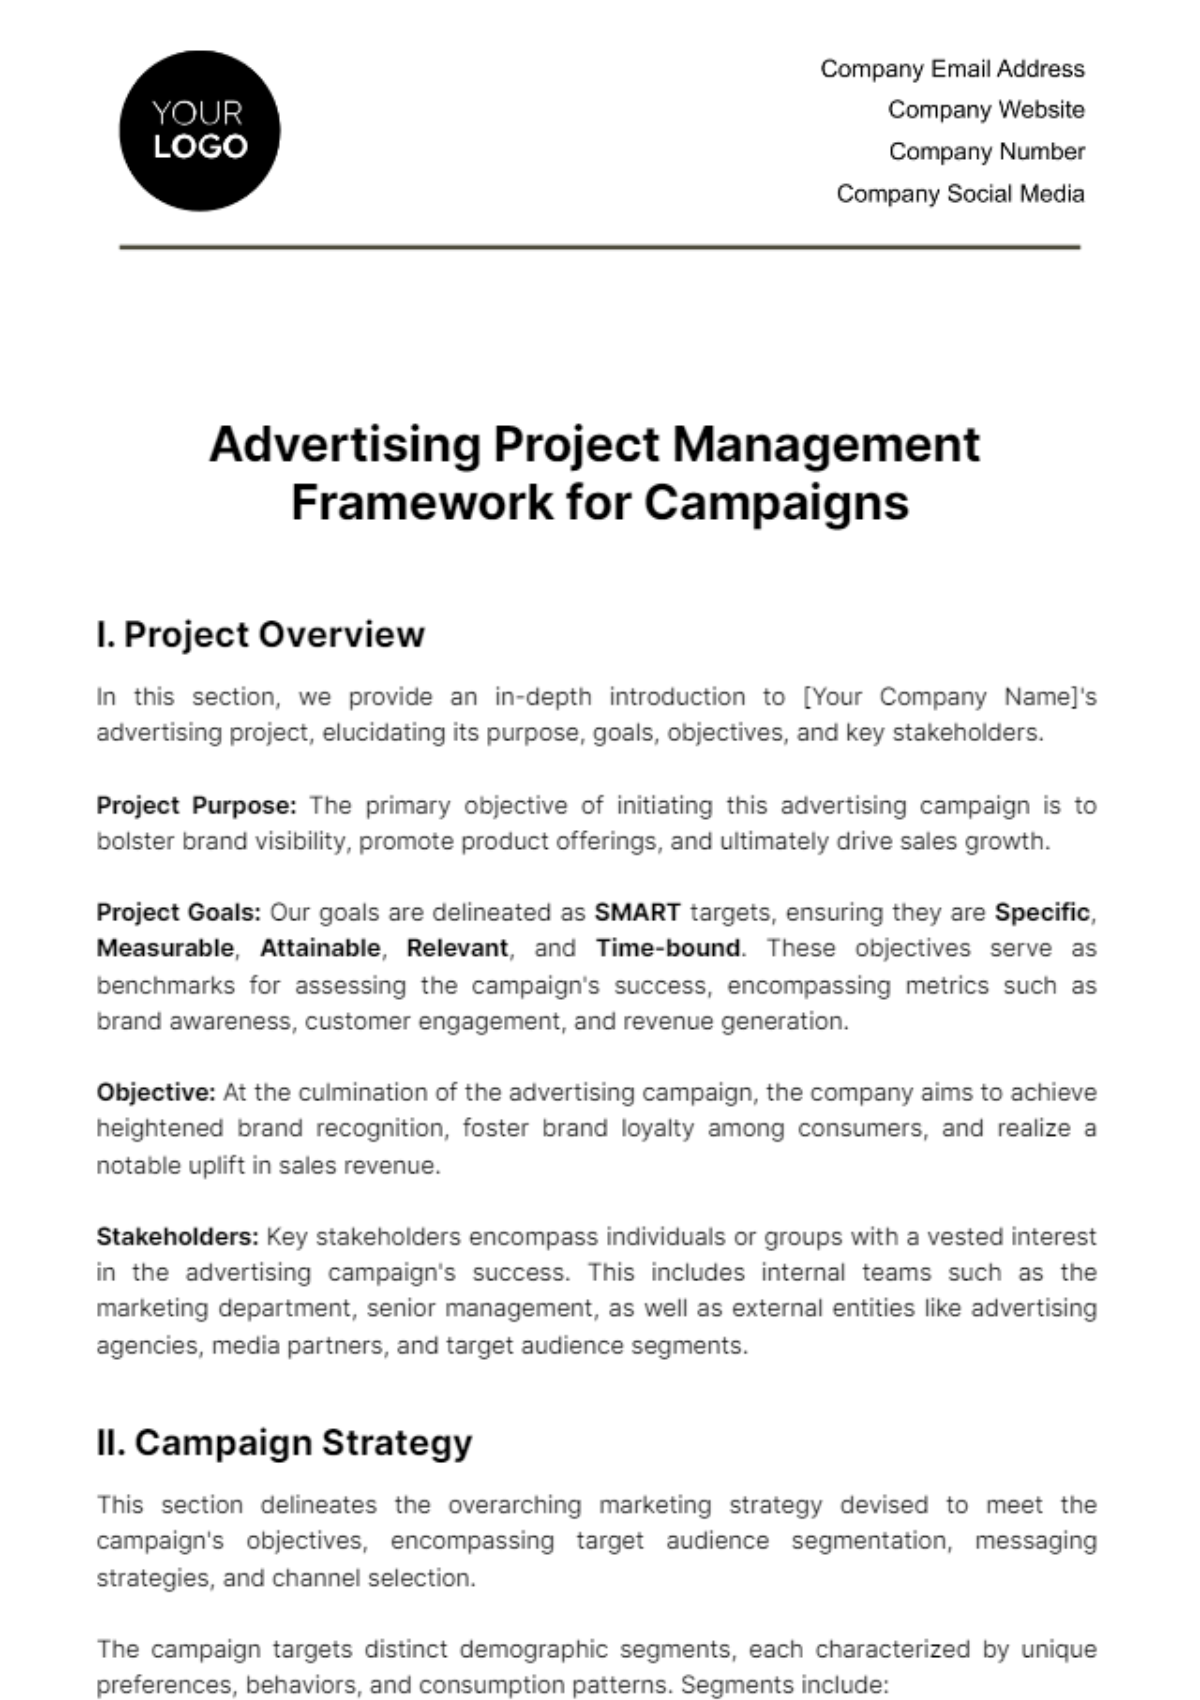 Free Advertising Project Management Framework for Campaigns Template